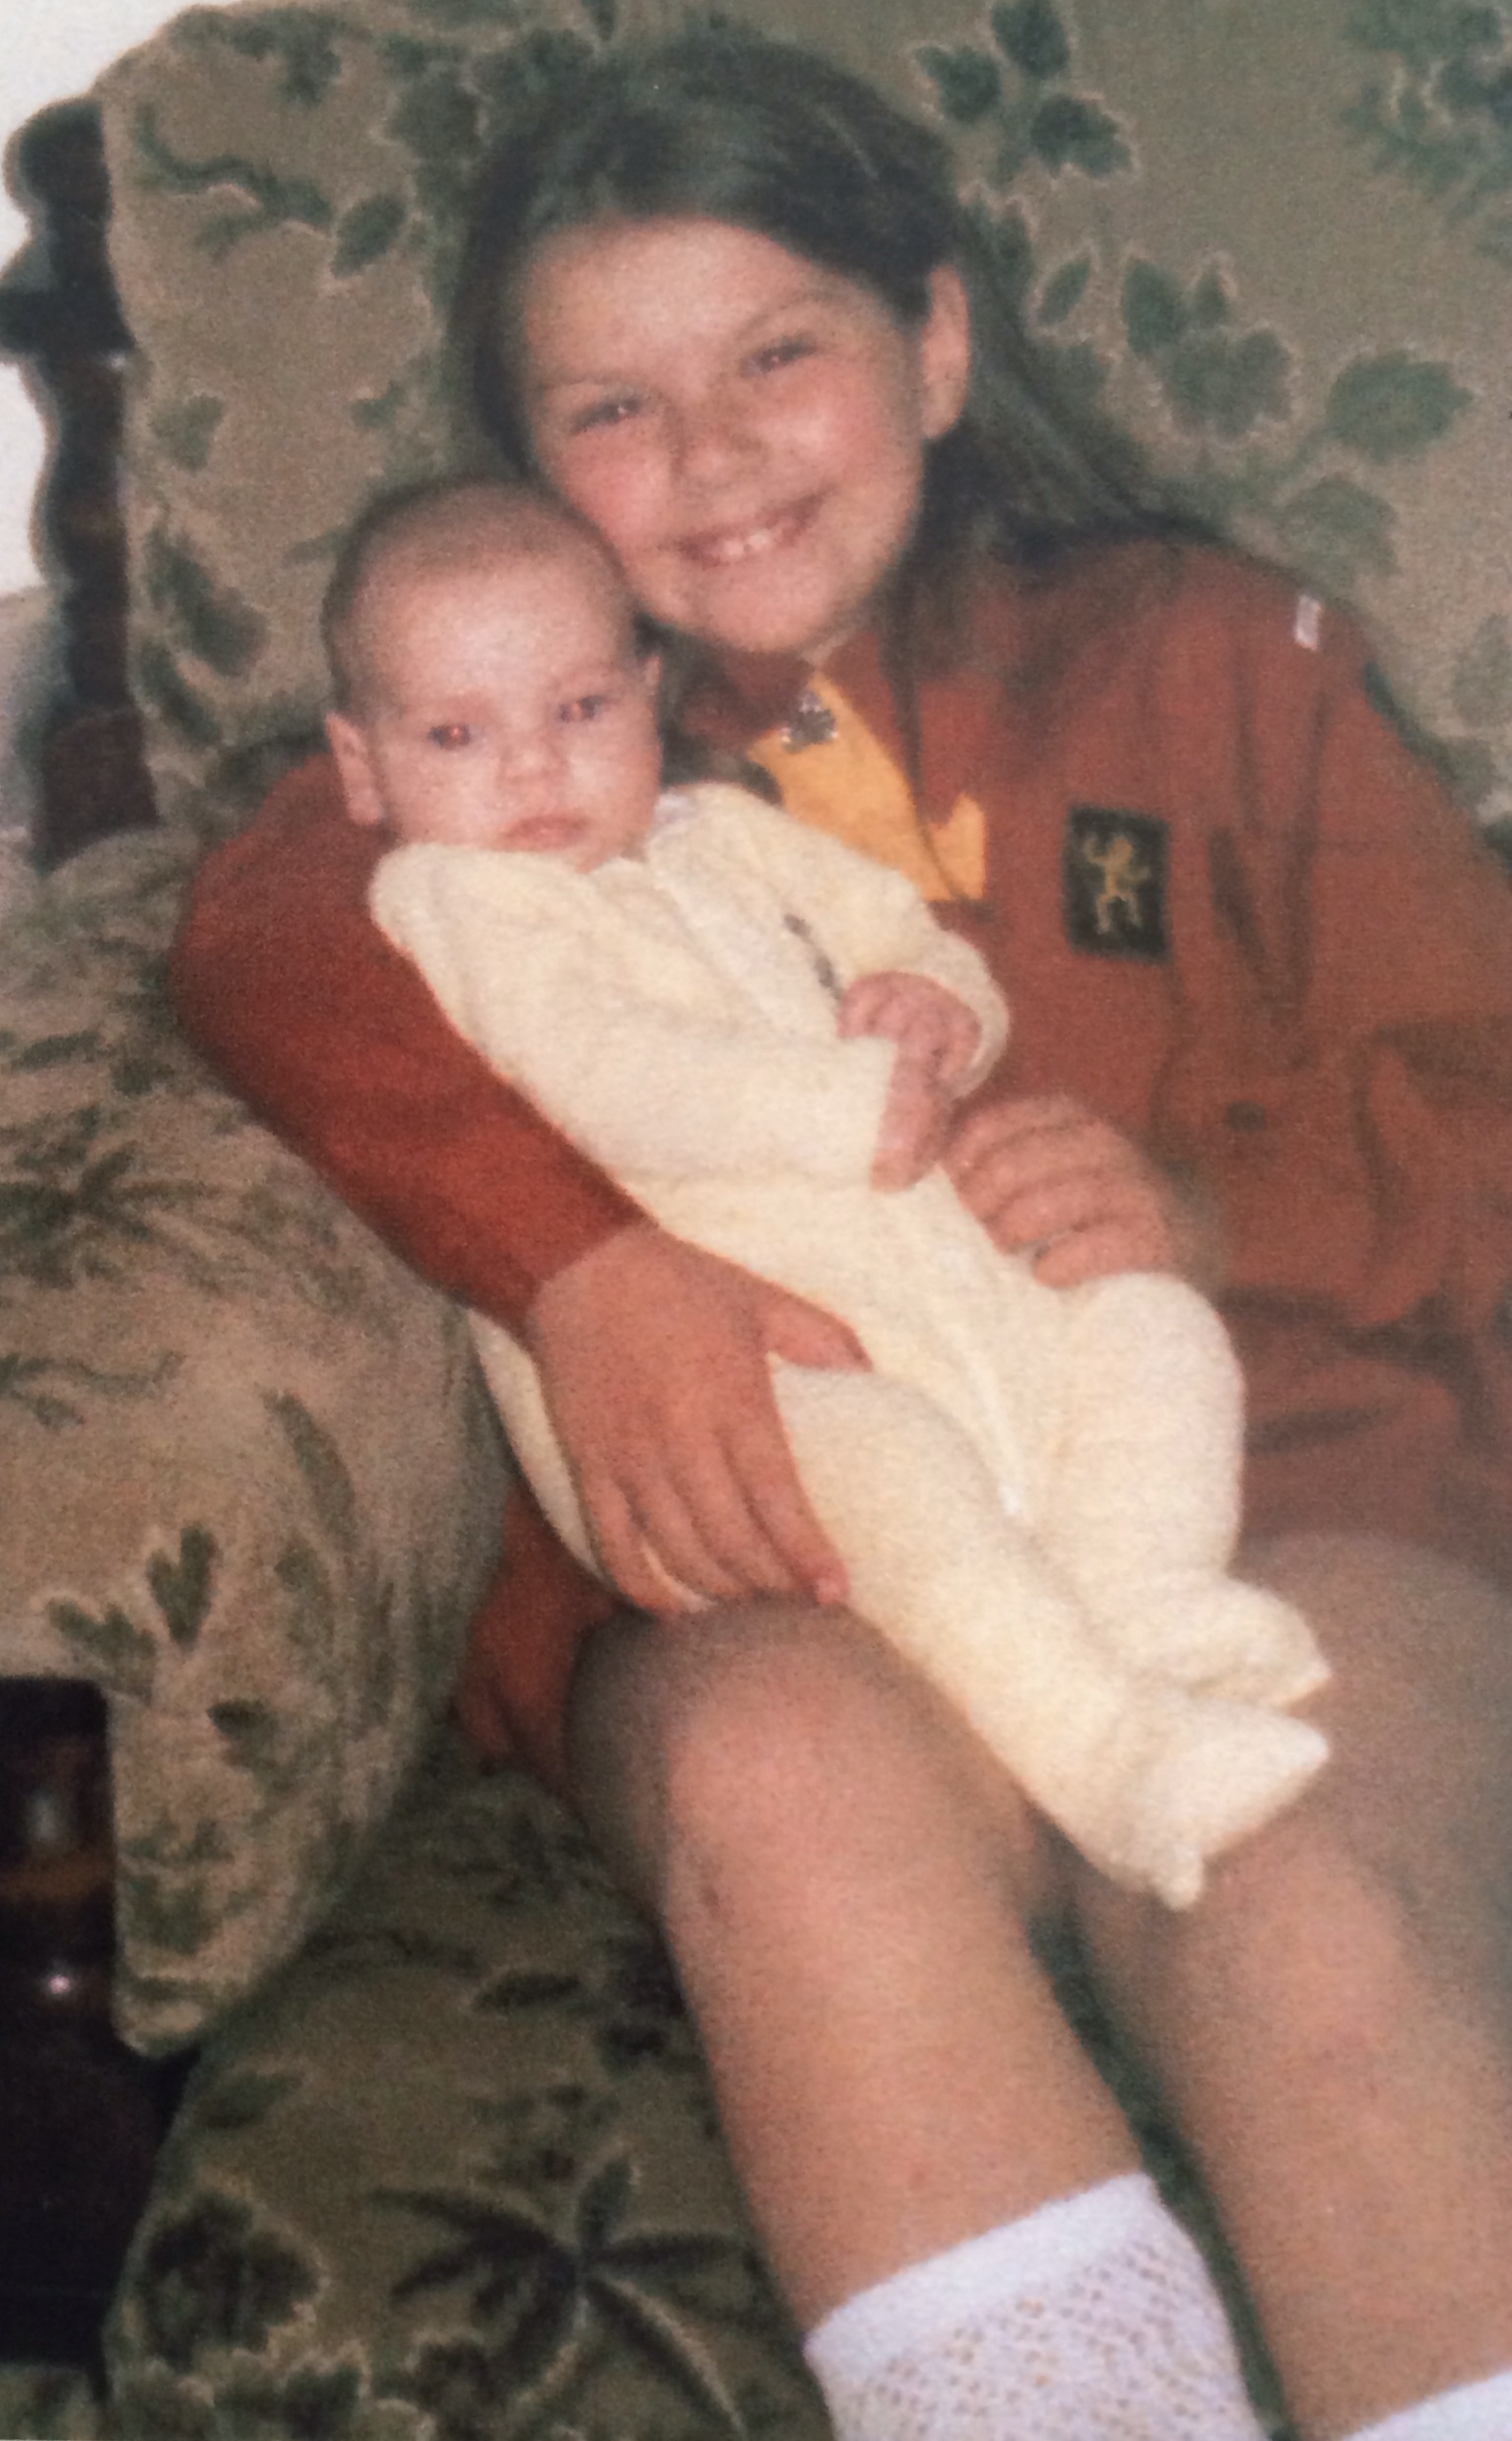 Yes this is me in my Brownie Uniform, minus the brown bobble hat! The baby is my sister Laura!